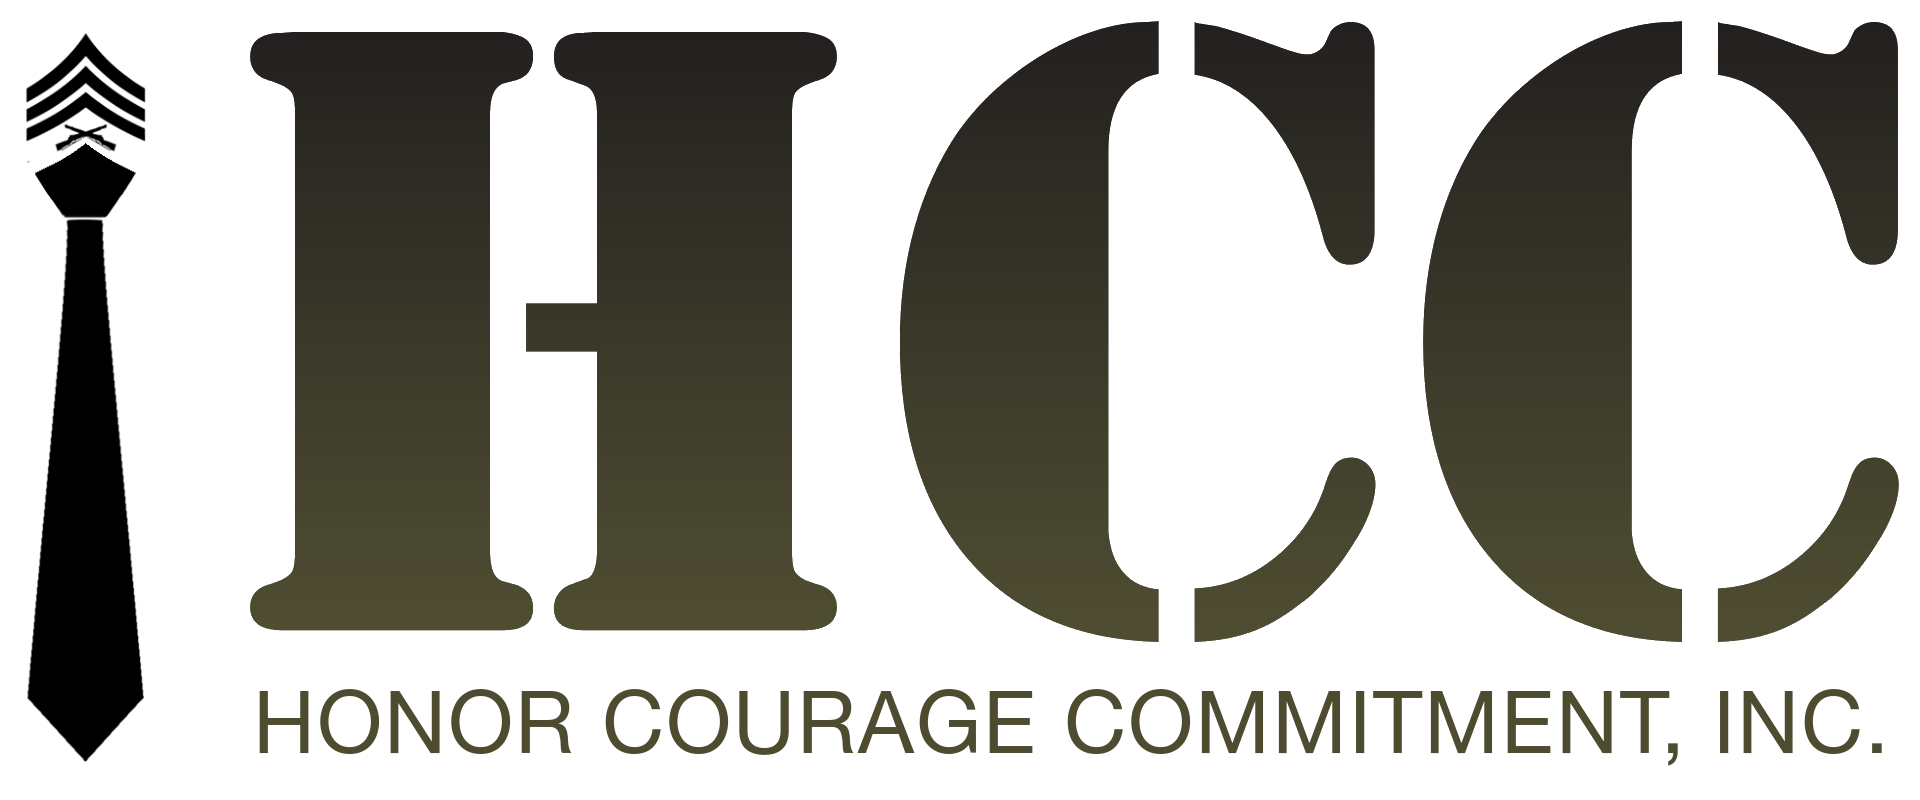 Honor Courage Commitment, Inc.